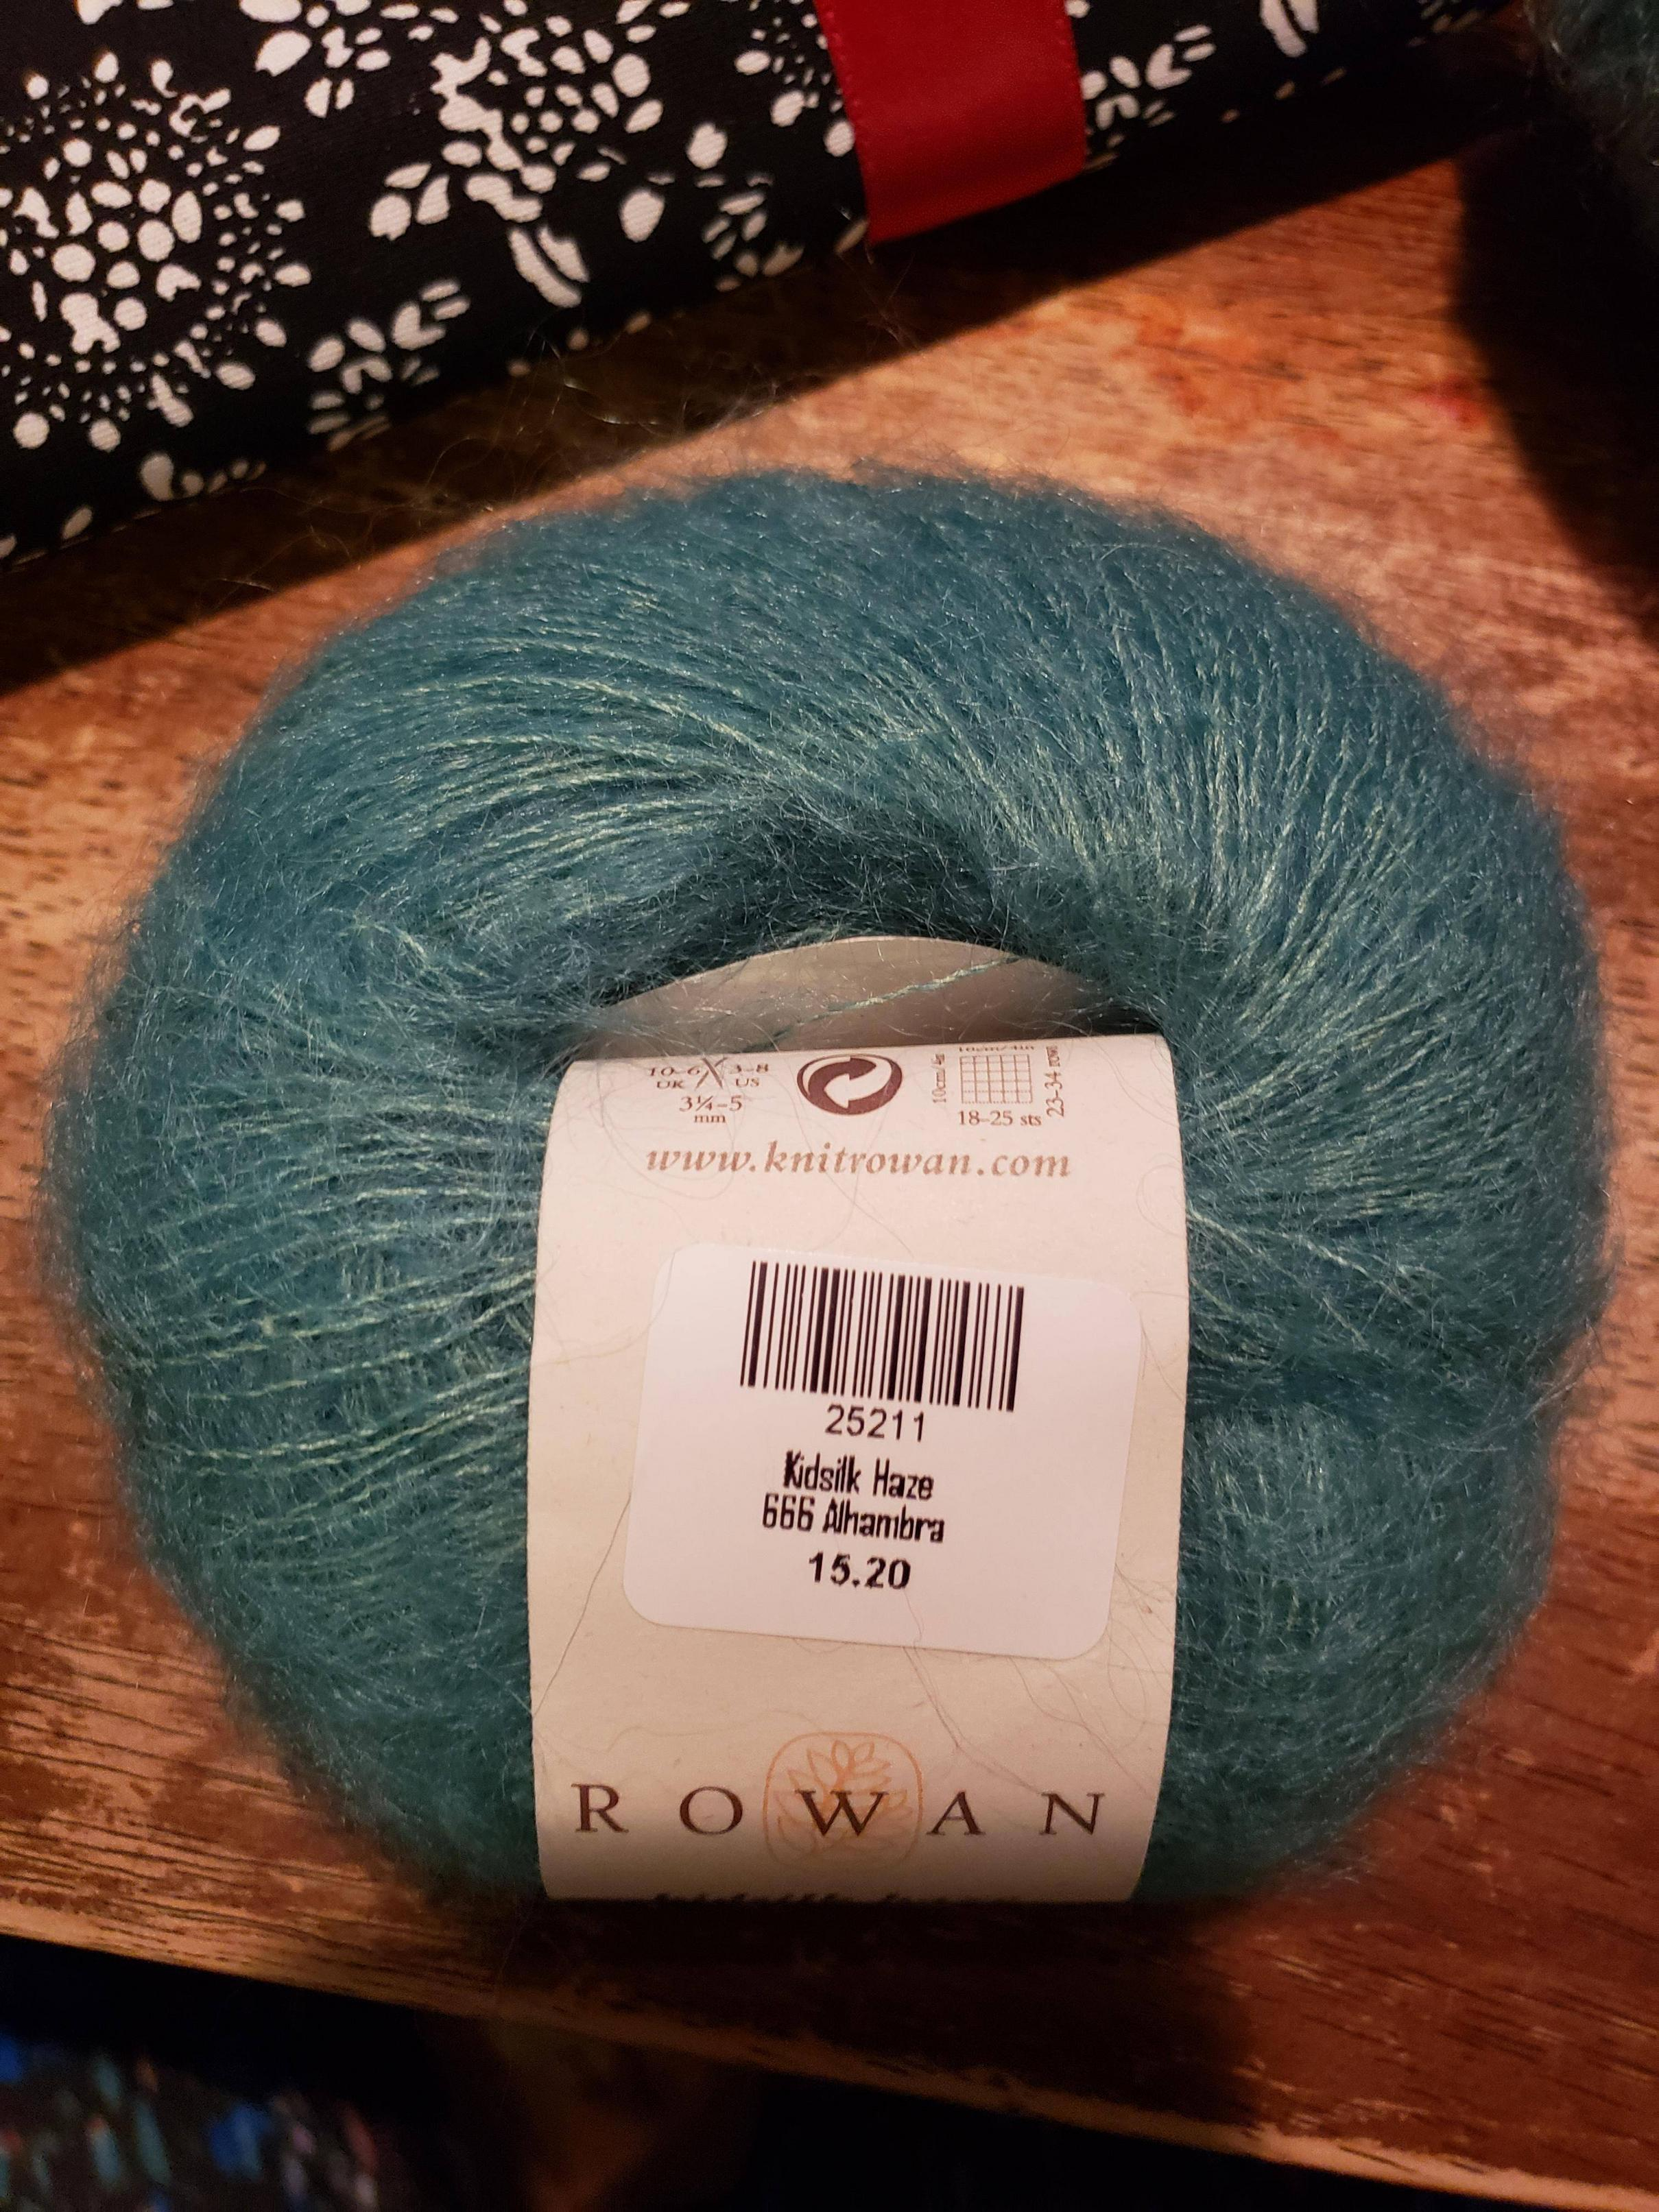 Knitrowan Com Free Knitting Patterns Help First Time Working With Mohair Silk How To Ball This Knitting